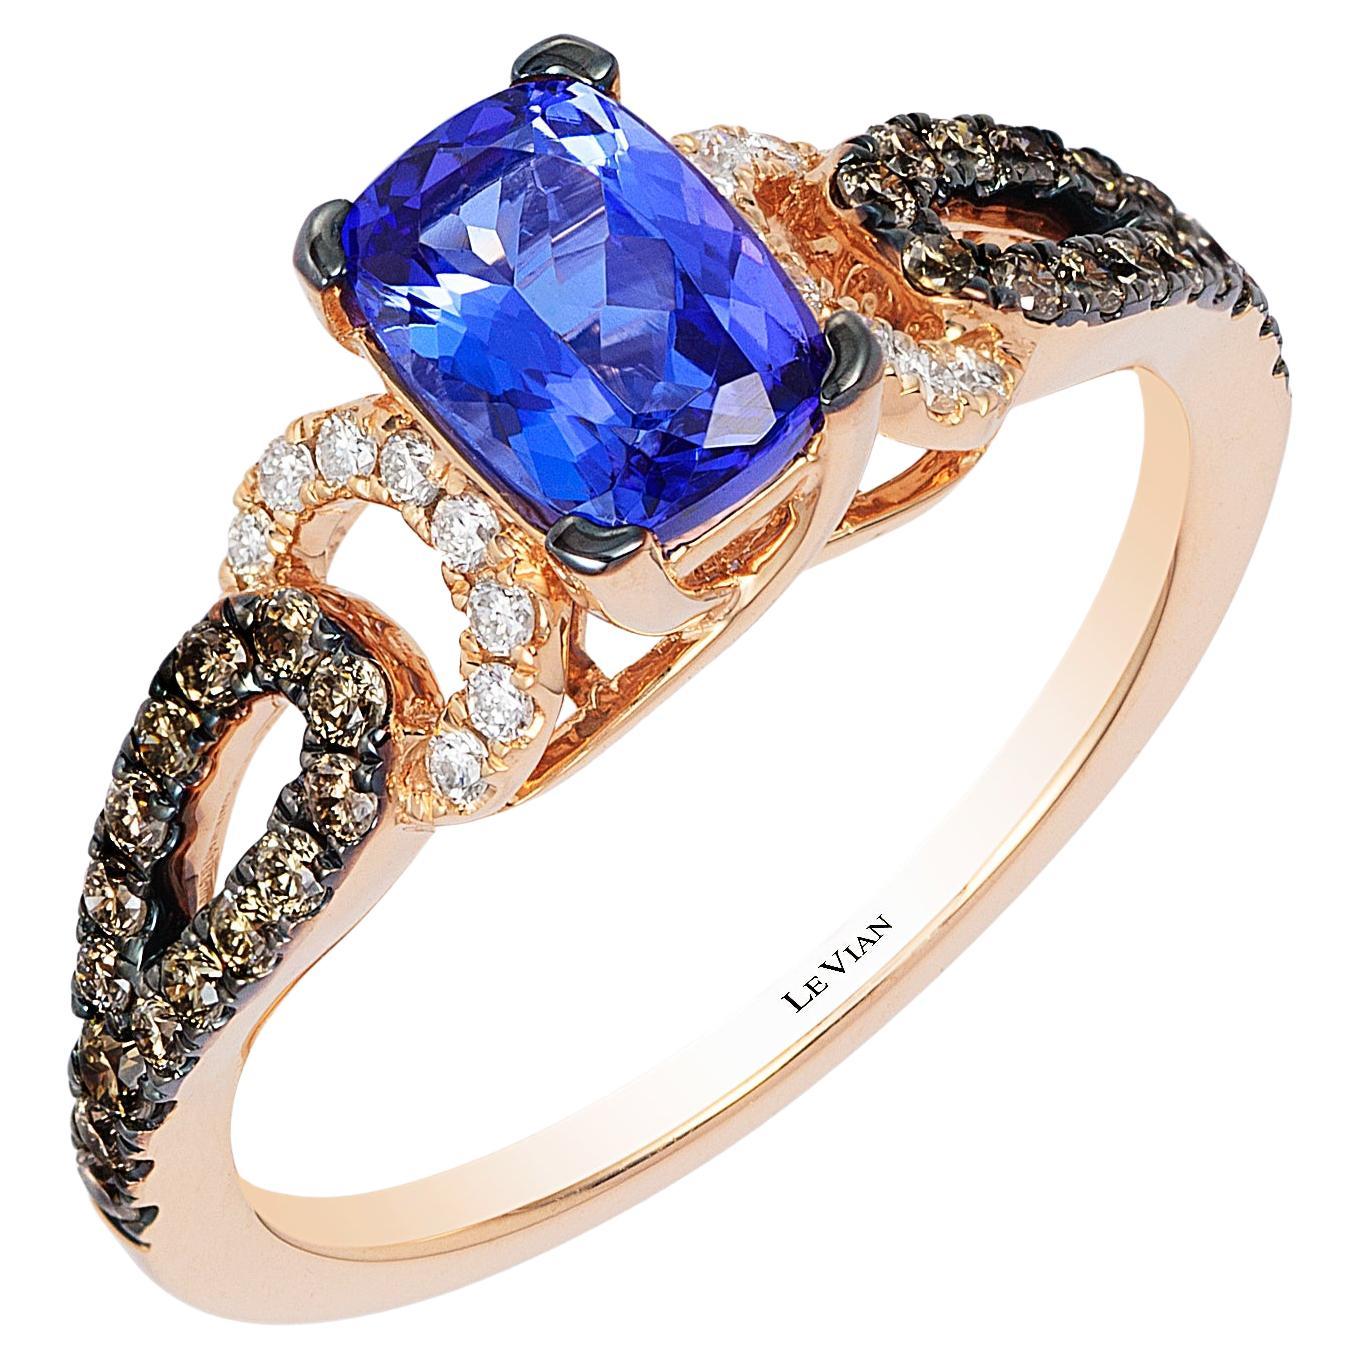 LeVian Blue Tanzanite and Diamond Ring in 14K Rose Gold Size 7